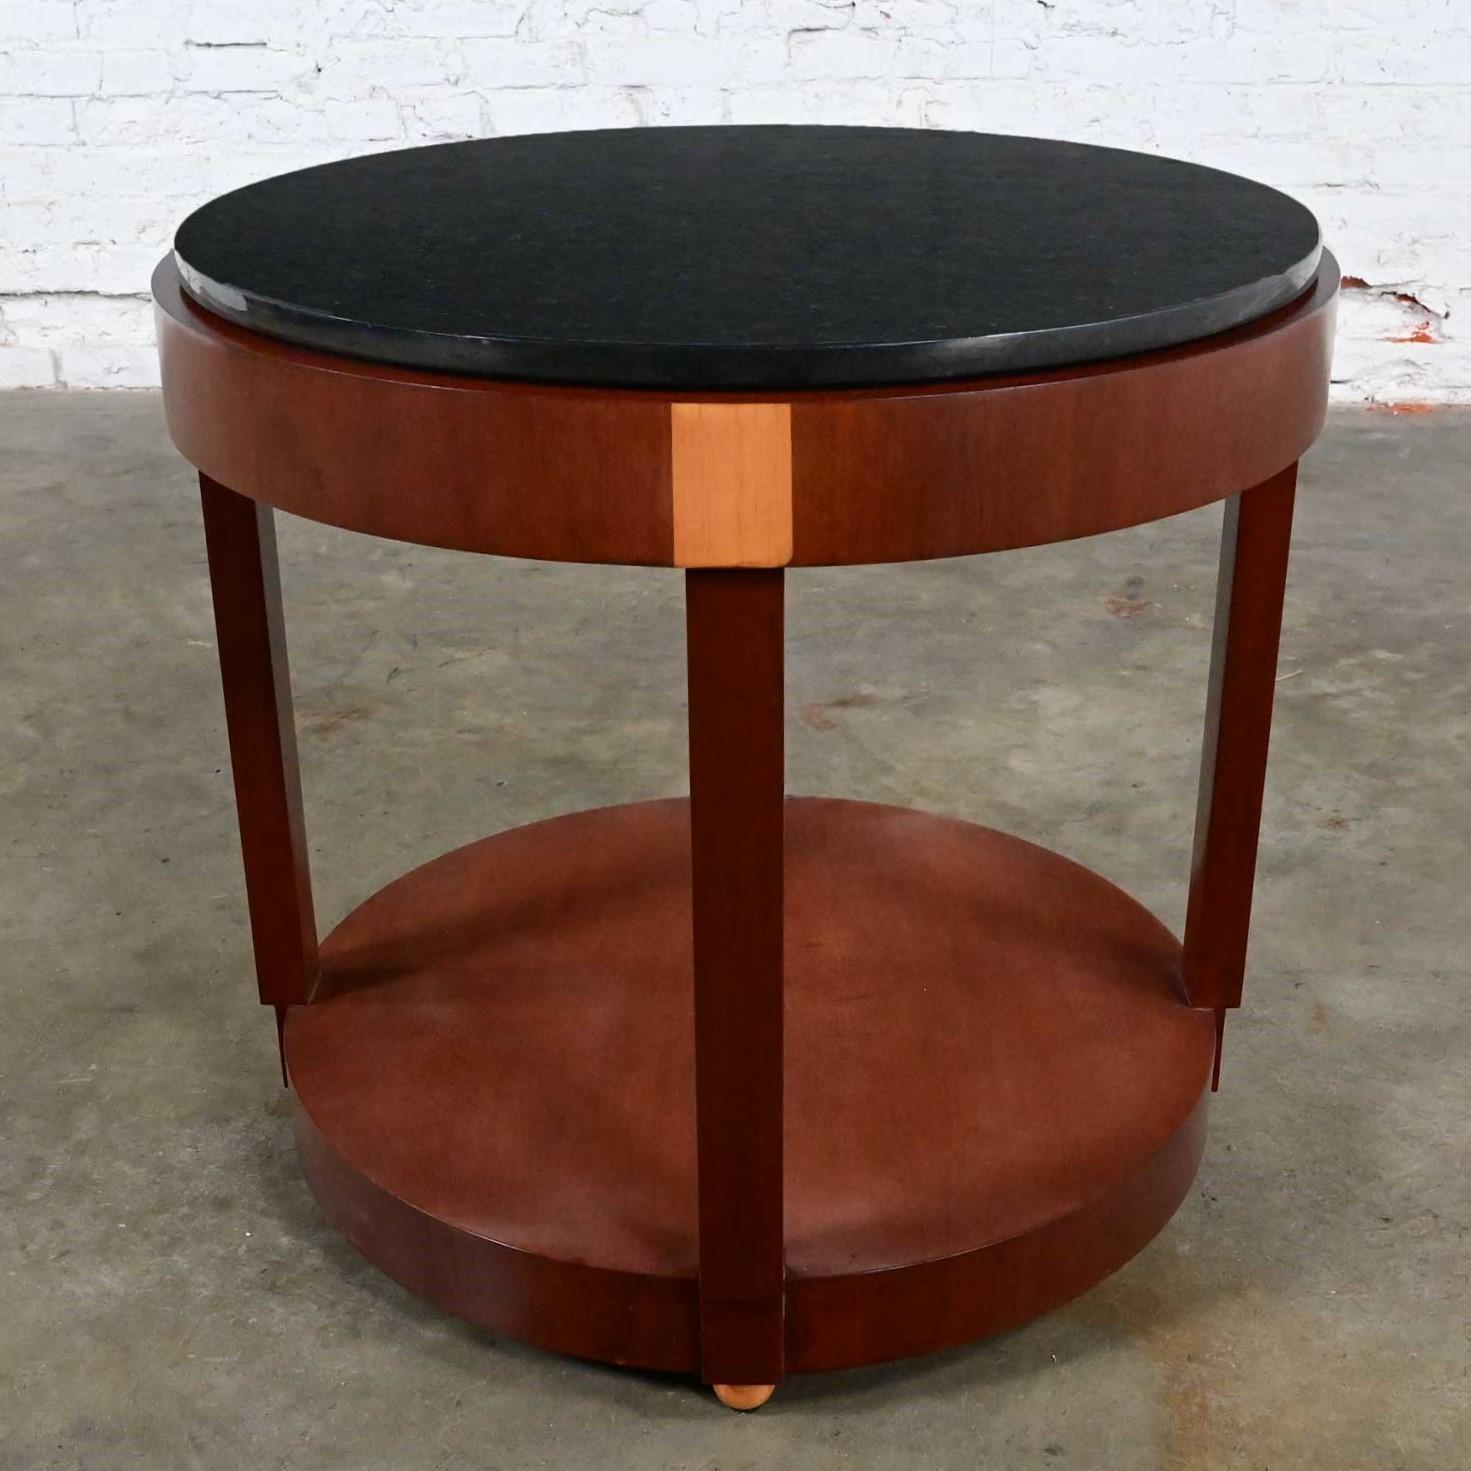 Art Deco Revival Custom Two Toned Mahogany Round Side Table Black Granite Top For Sale 7